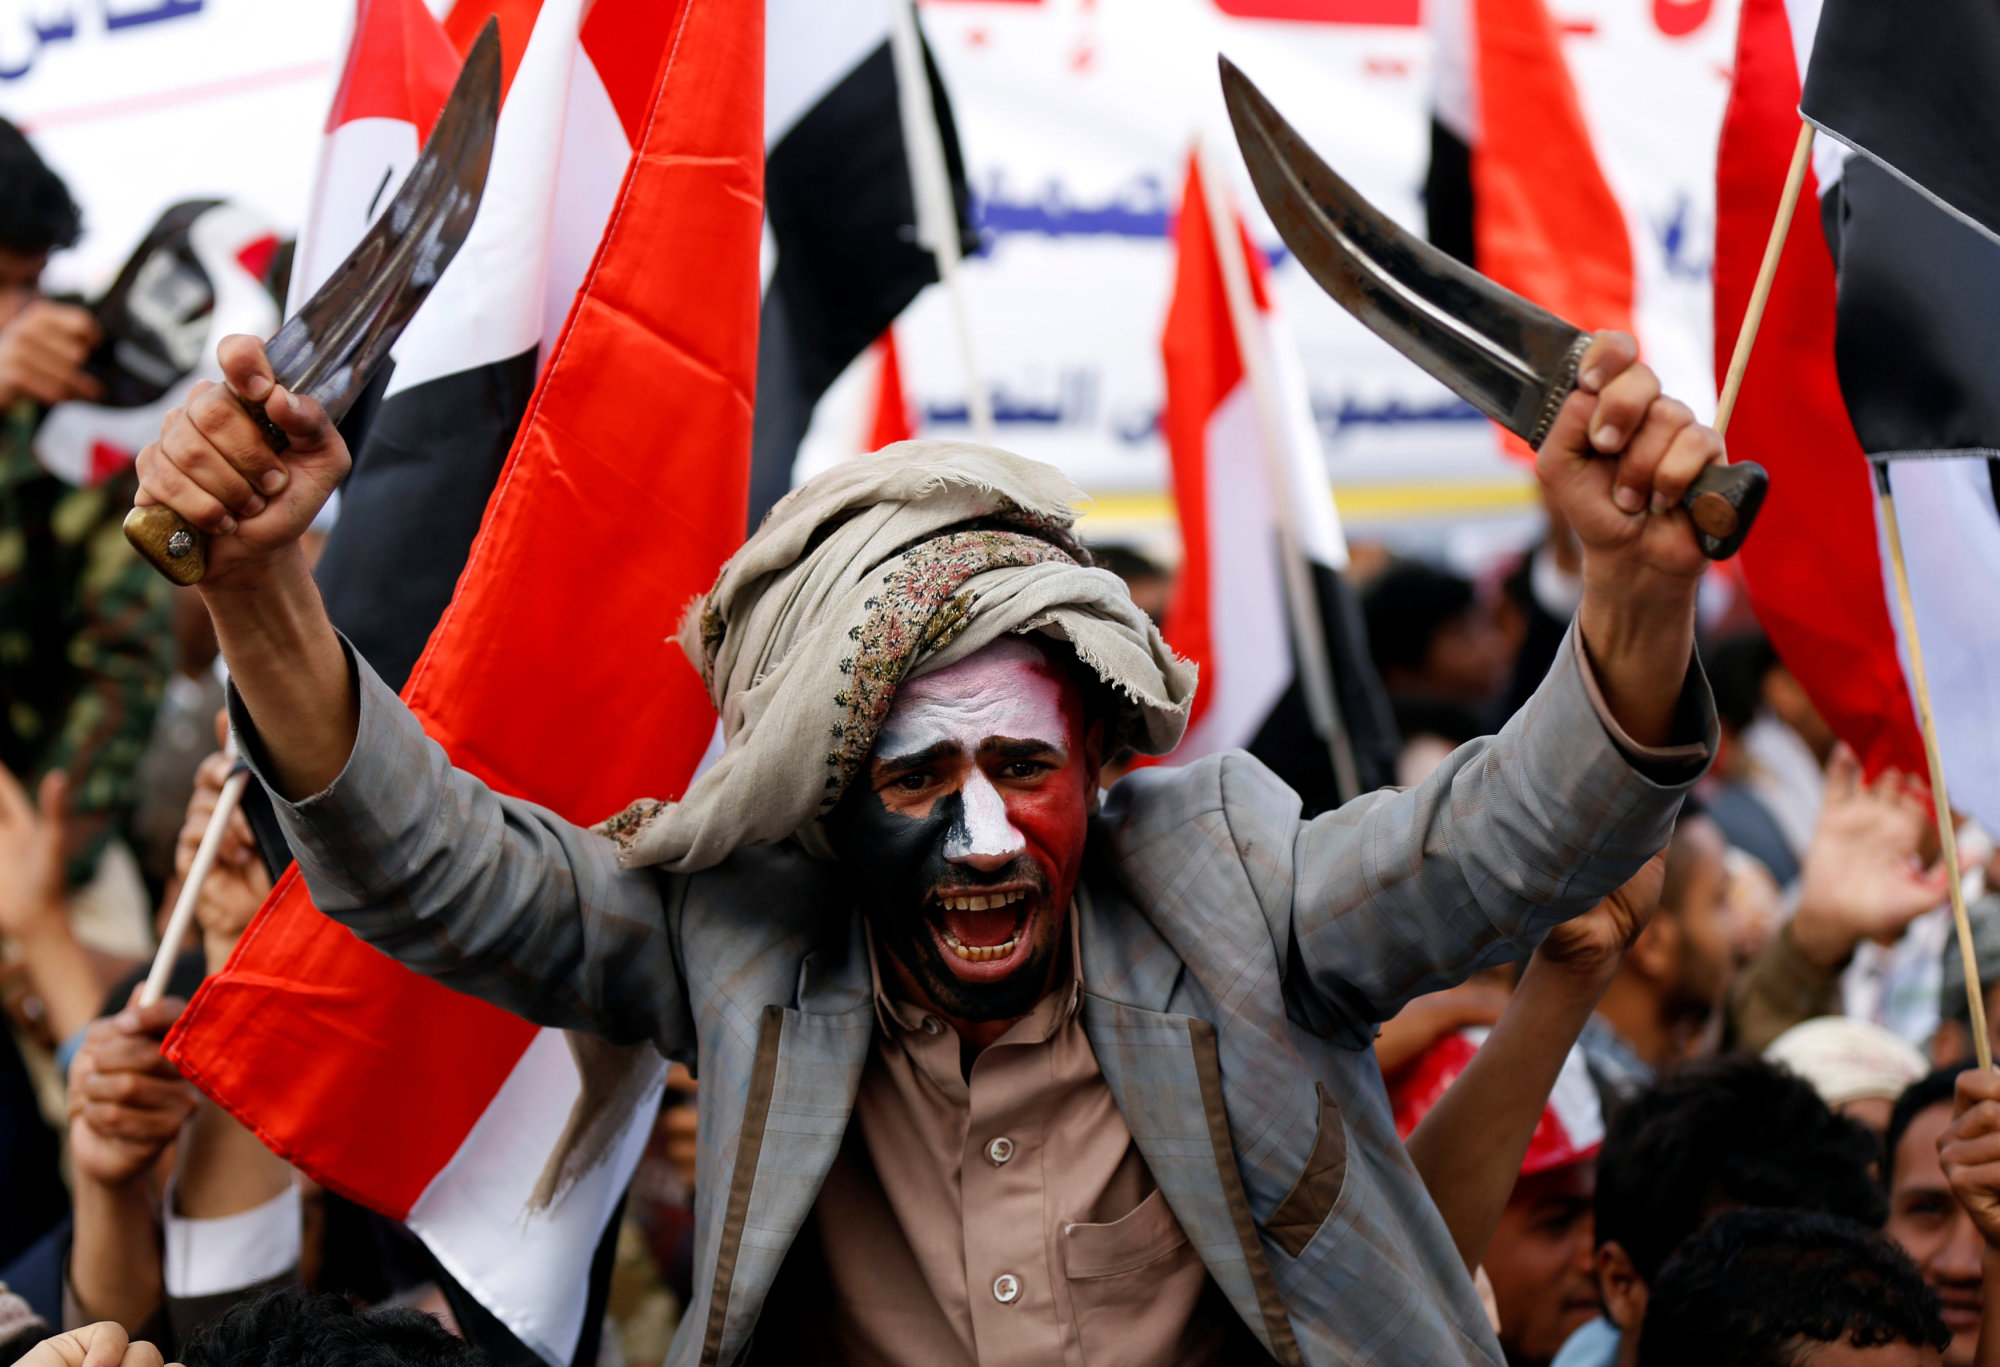 A man waves traditional daggers, or jambiyas, during a mass rally by supporters of the Houthi movement and former Yemeni President Ali Abdullah Saleh in Sanaa on Sunday. | REUTERS